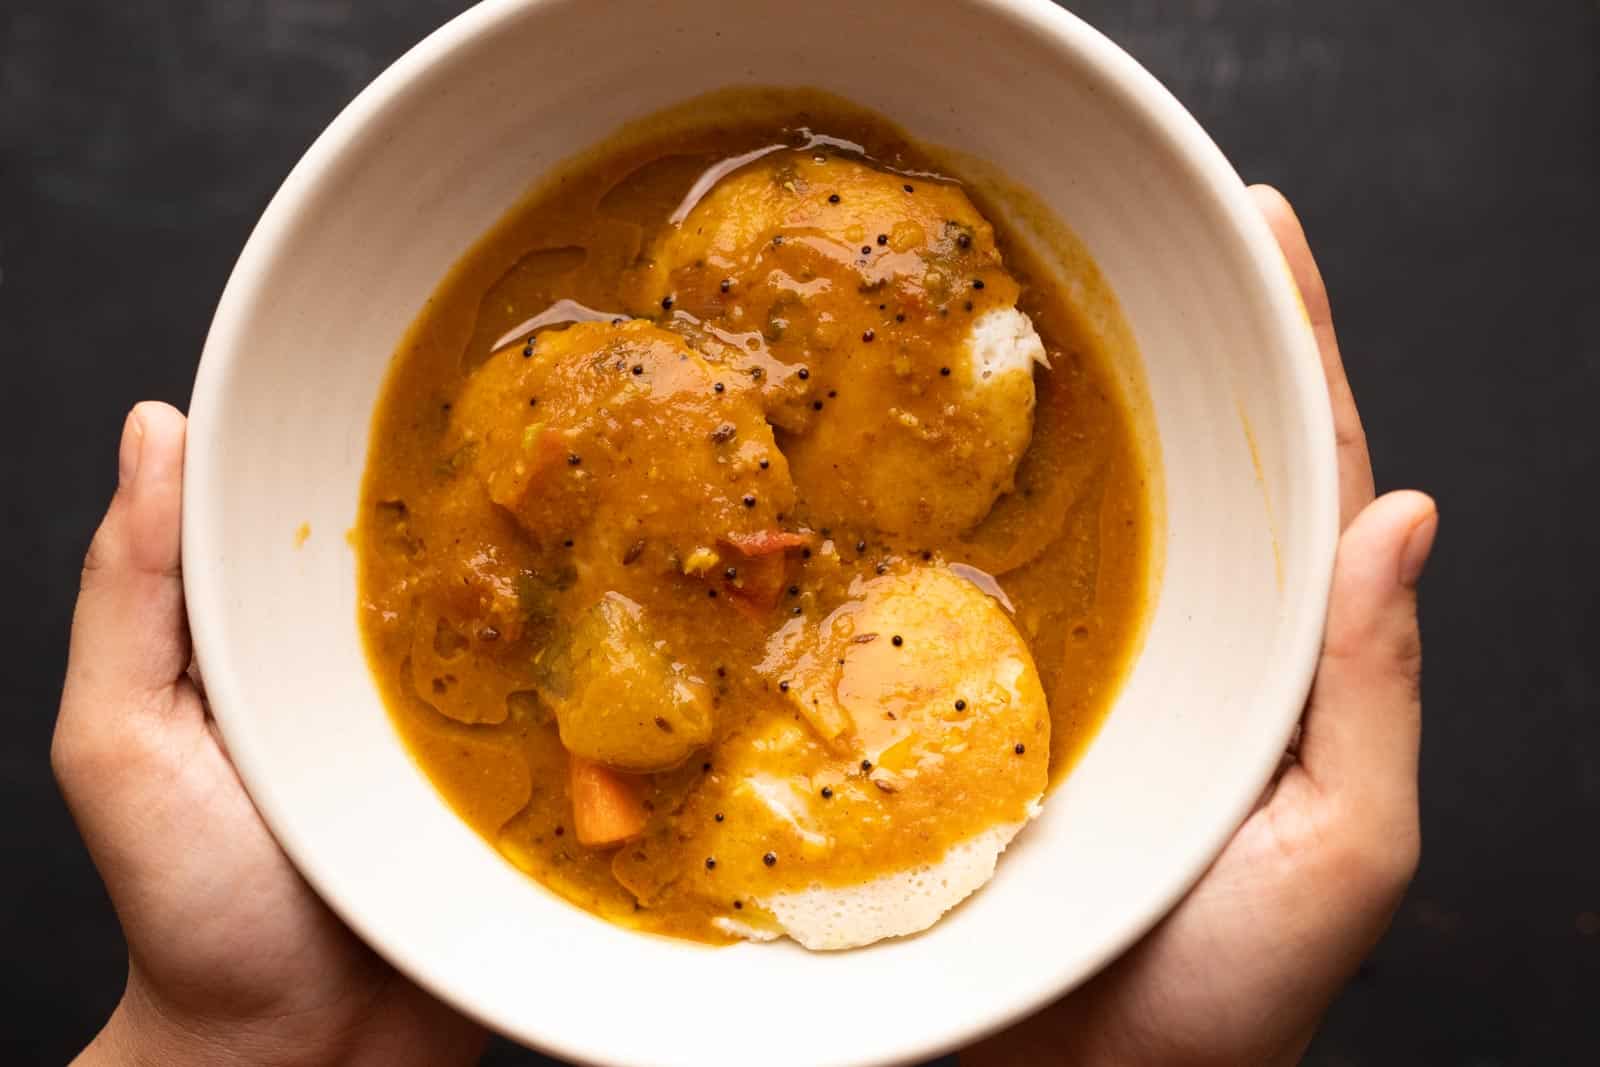 Sambar poured over steaming hot idlis in a bowl. Two hands hold the bowl as if serving someone else